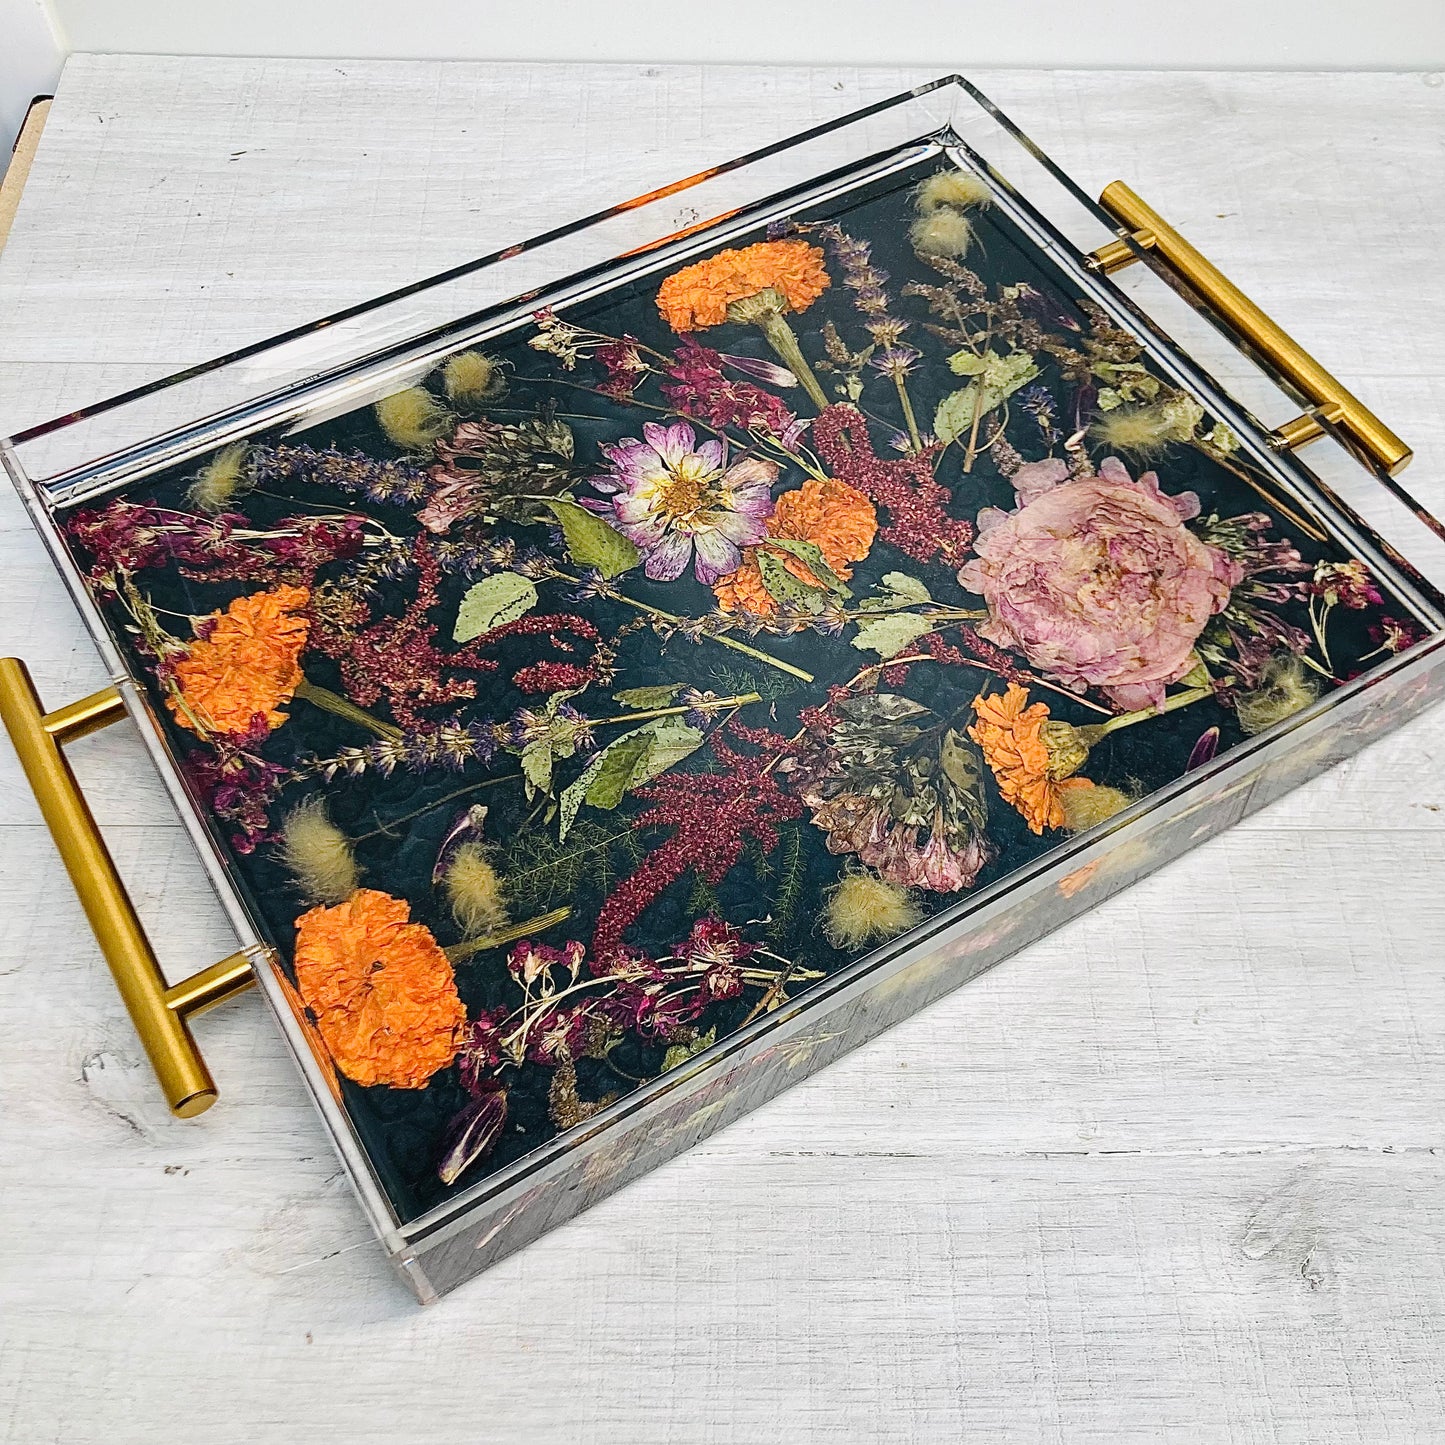 Flower Preservation lipped tray